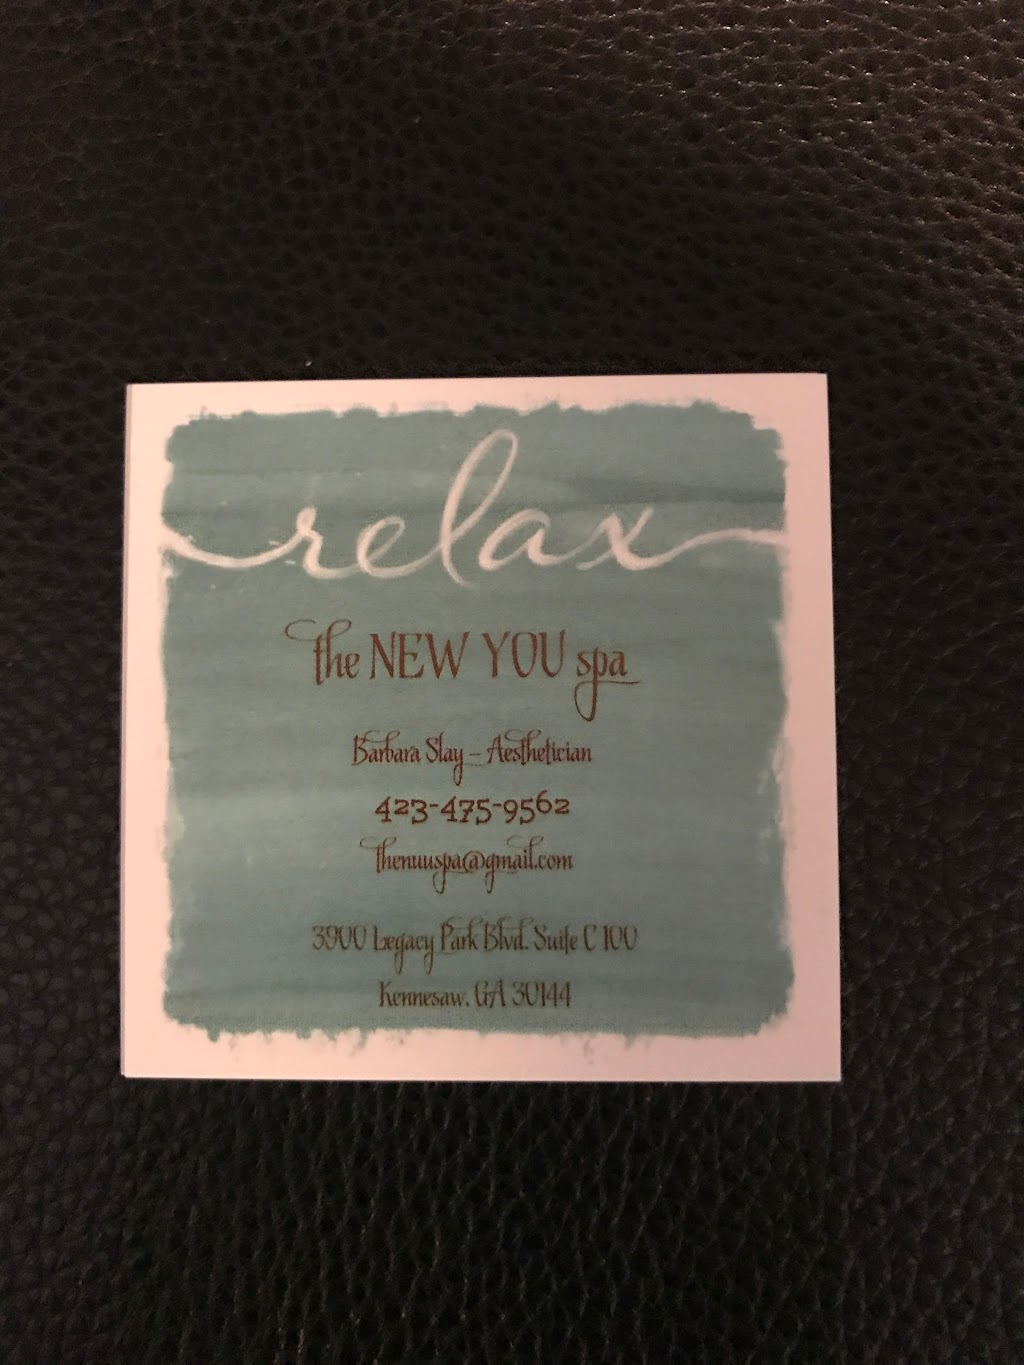 The New You Spa | 3900 Legacy Park Blvd C100, Kennesaw, GA 30144 | Phone: (423) 475-9562